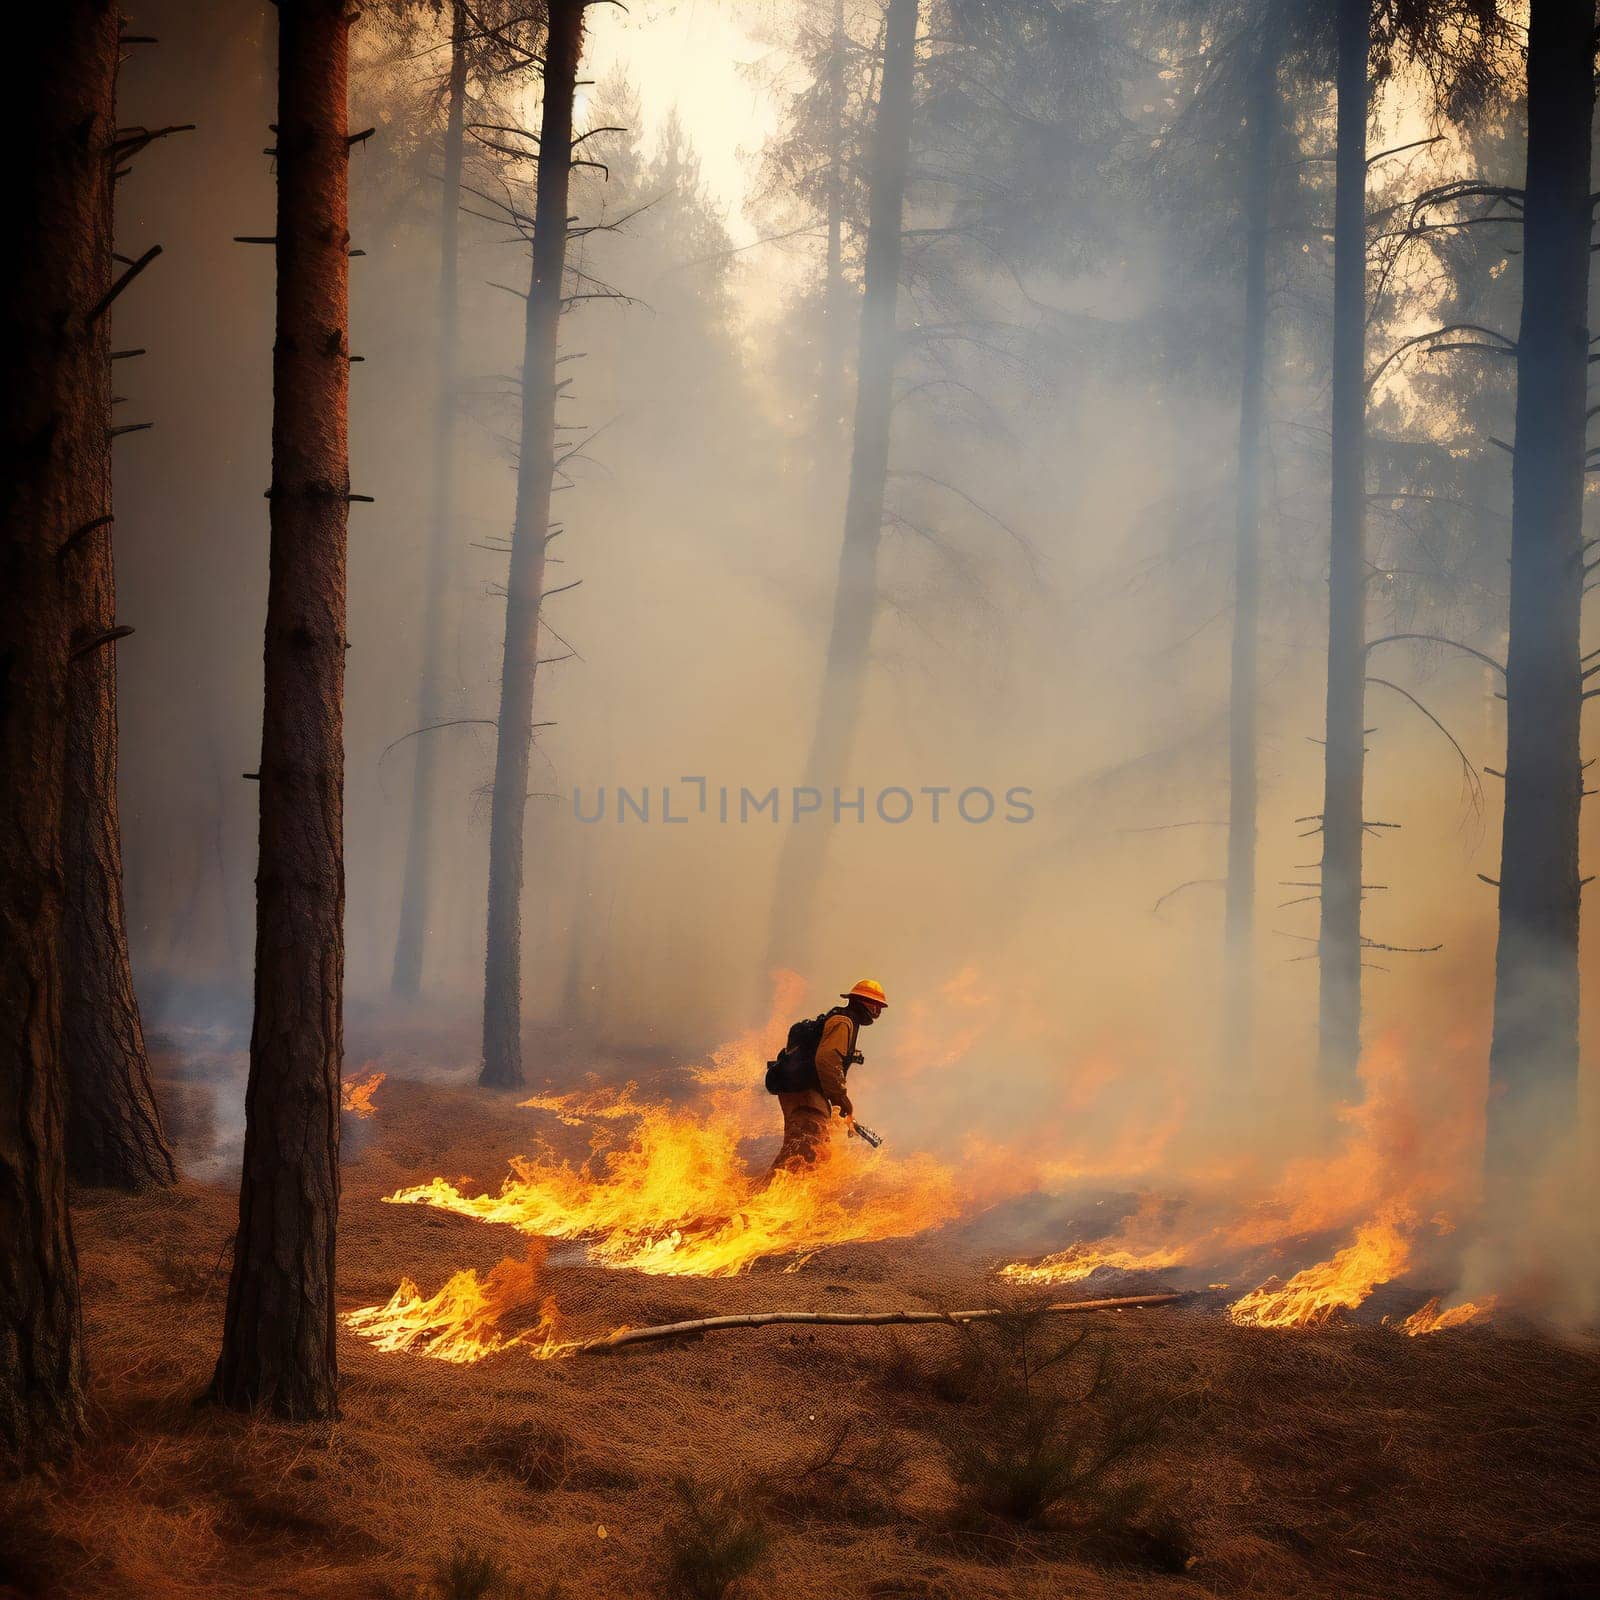 Firefighters try to extinguish the fire in a forest